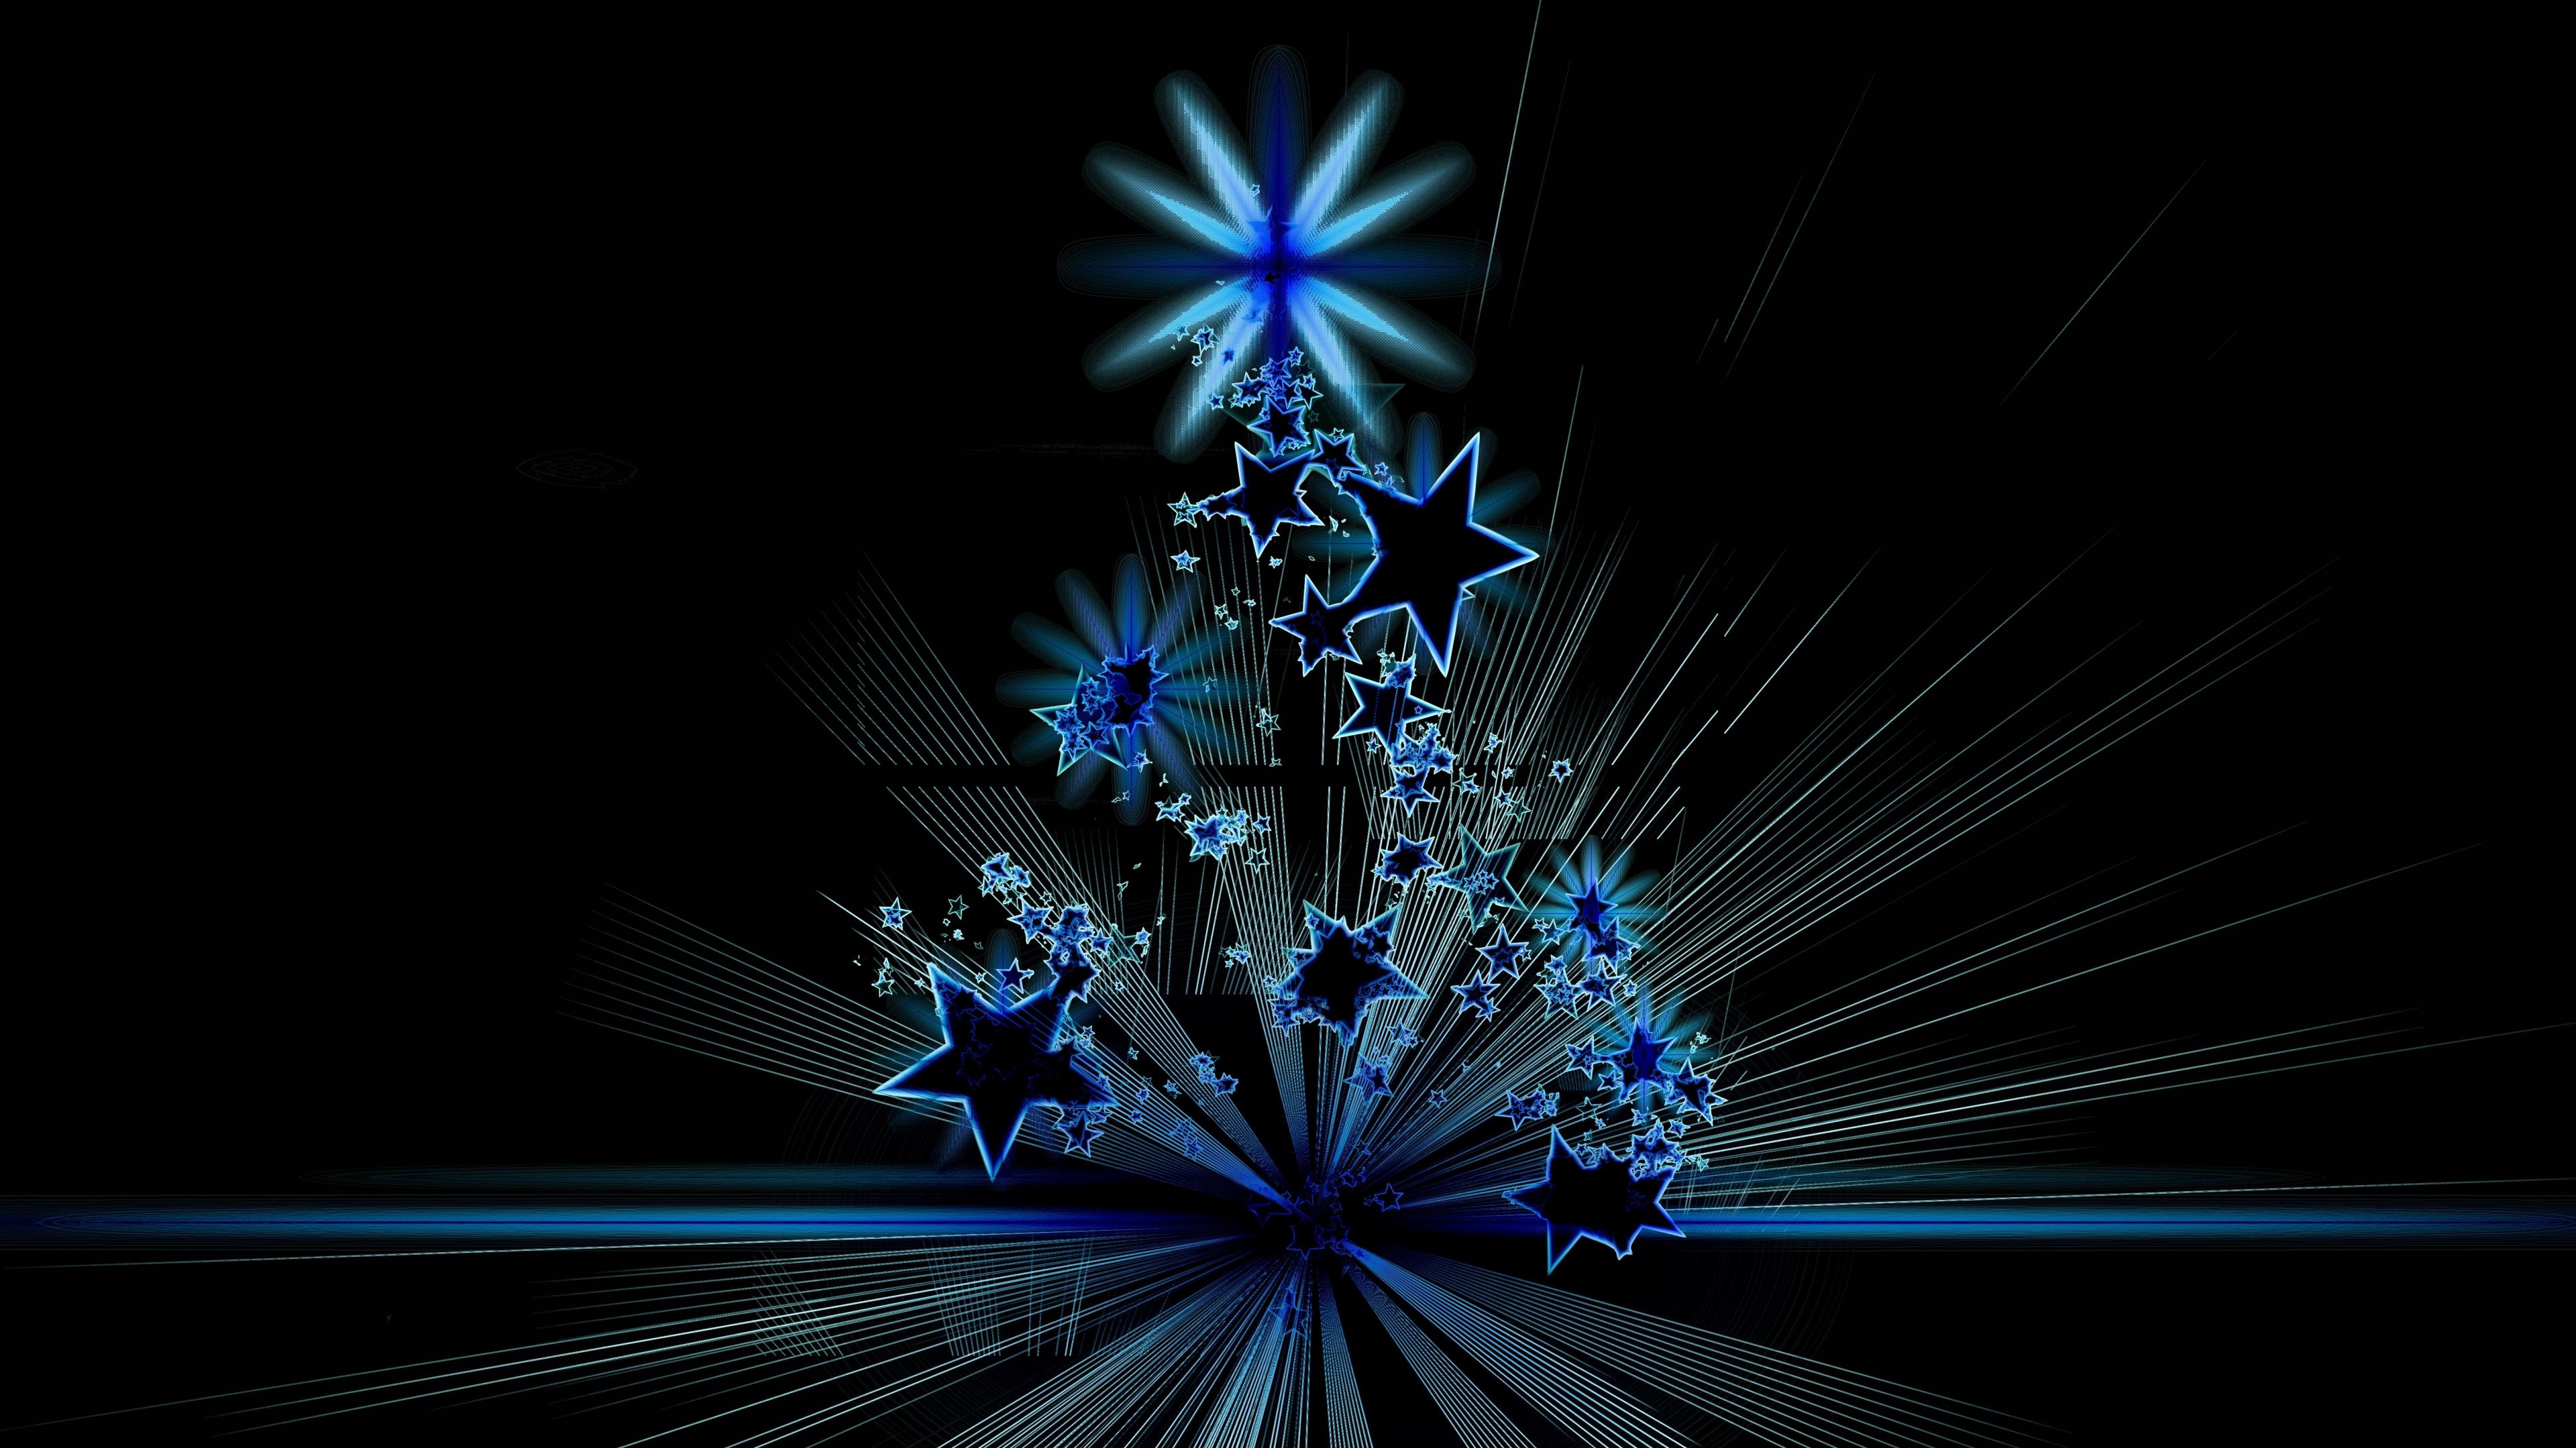 Download wallpaper 3840x2160 christmas tree stars abstract